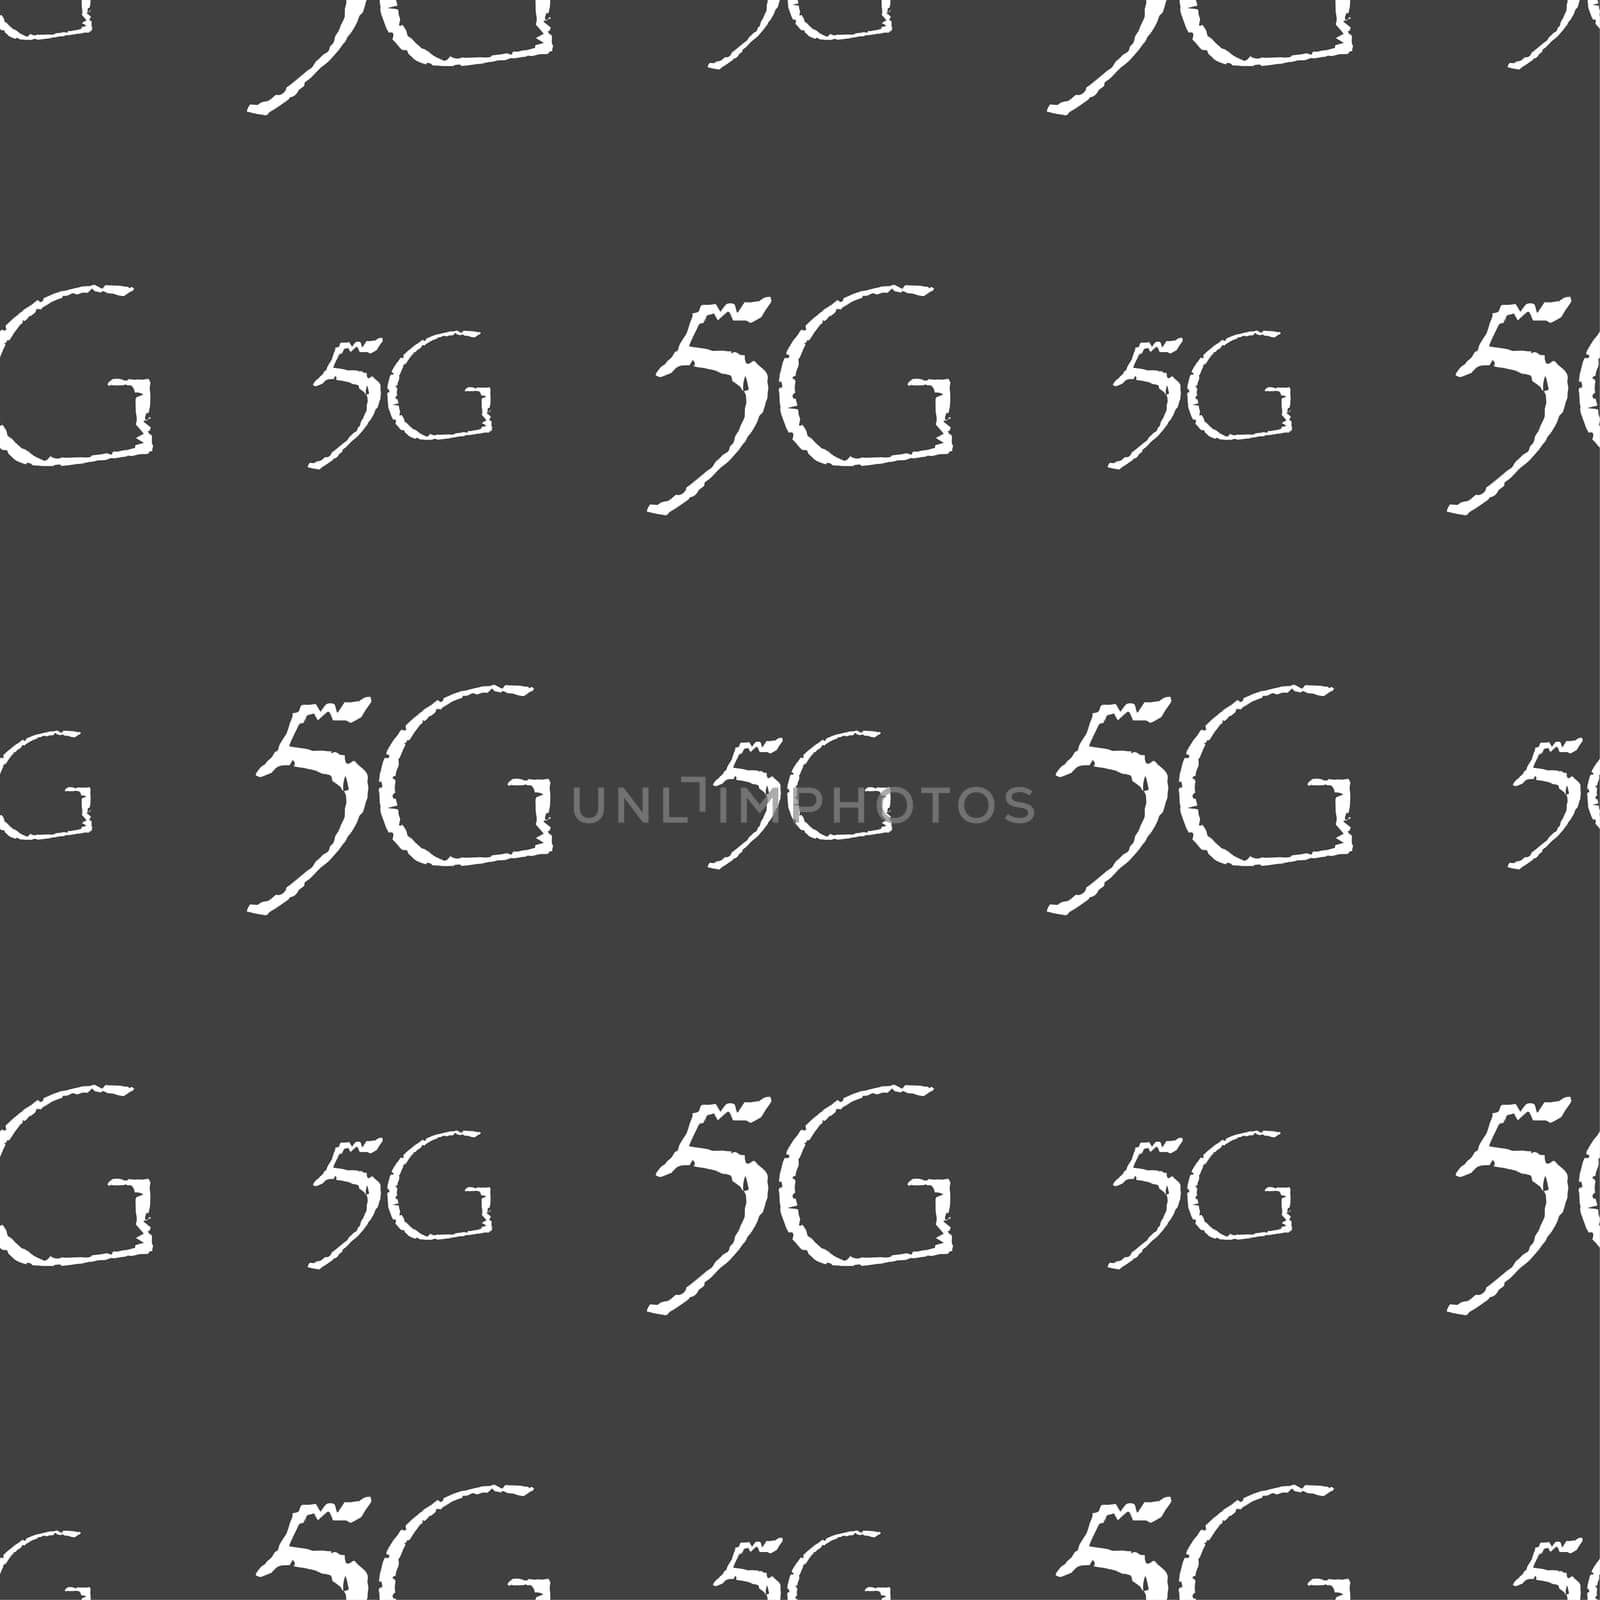 5G sign icon. Mobile telecommunications technology symbol. Seamless pattern on a gray background. illustration